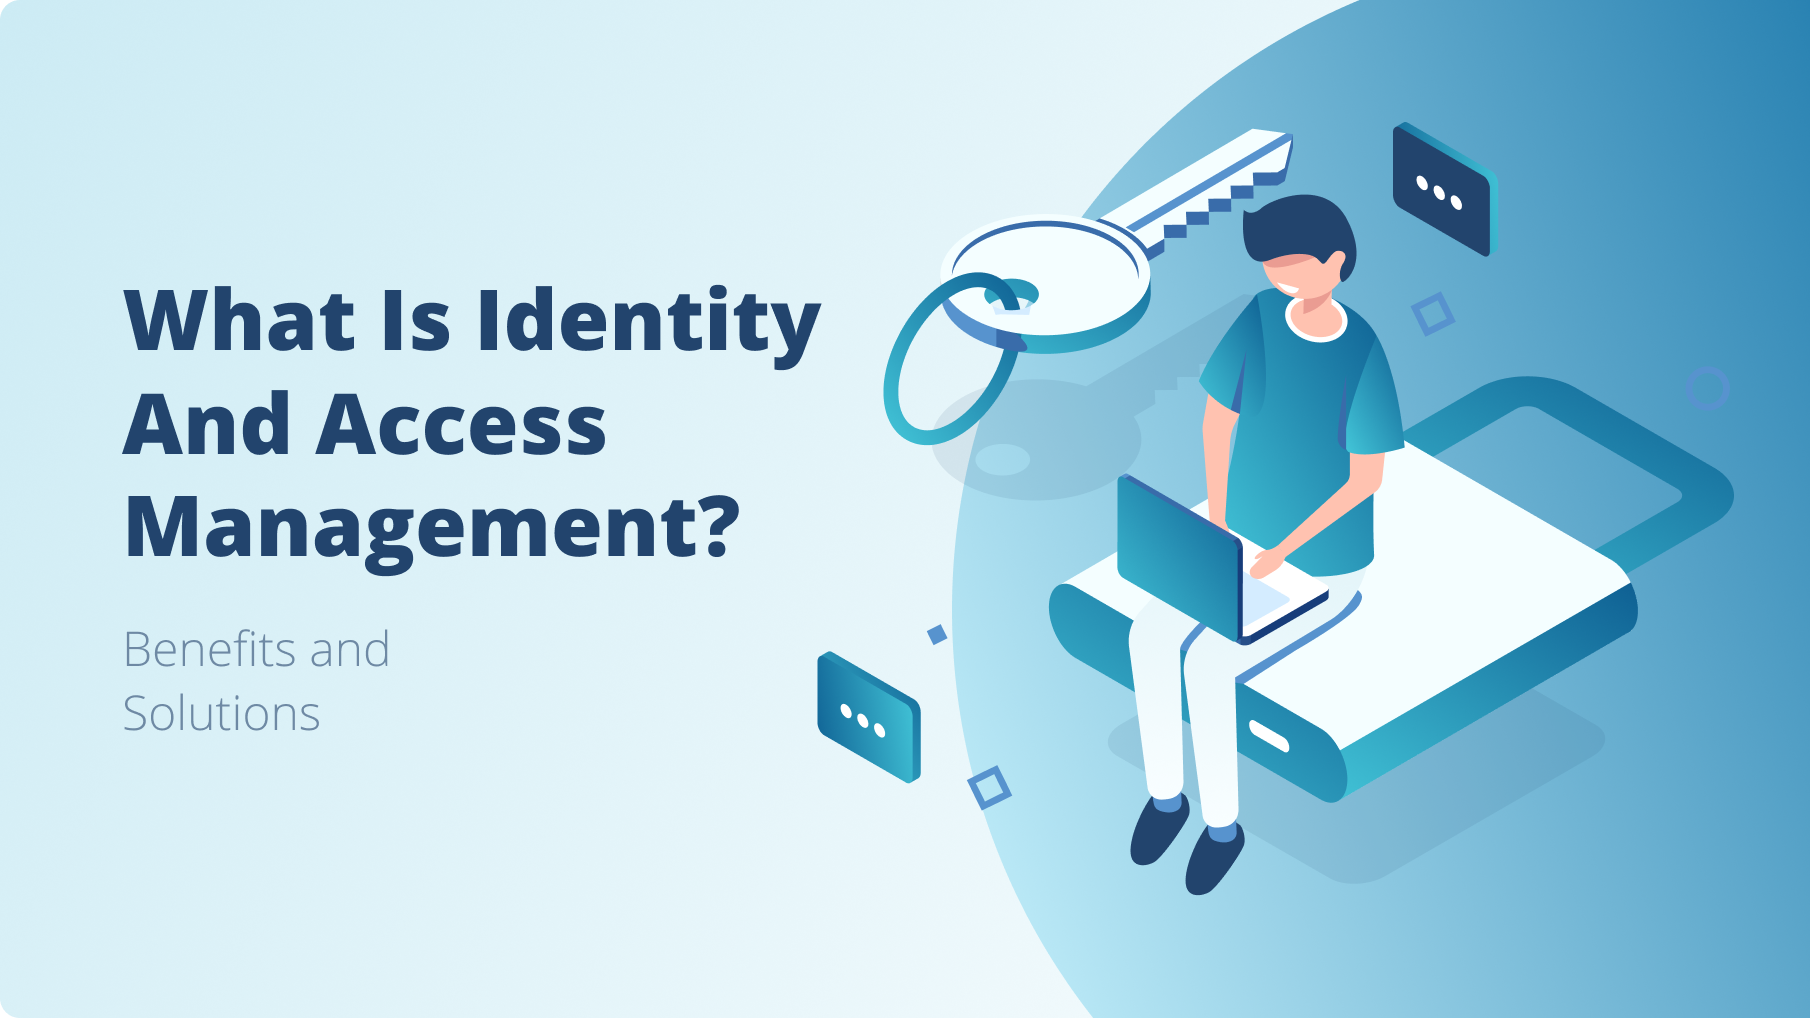 Benefits and Solutions for Identity and Acess Management (IAM)